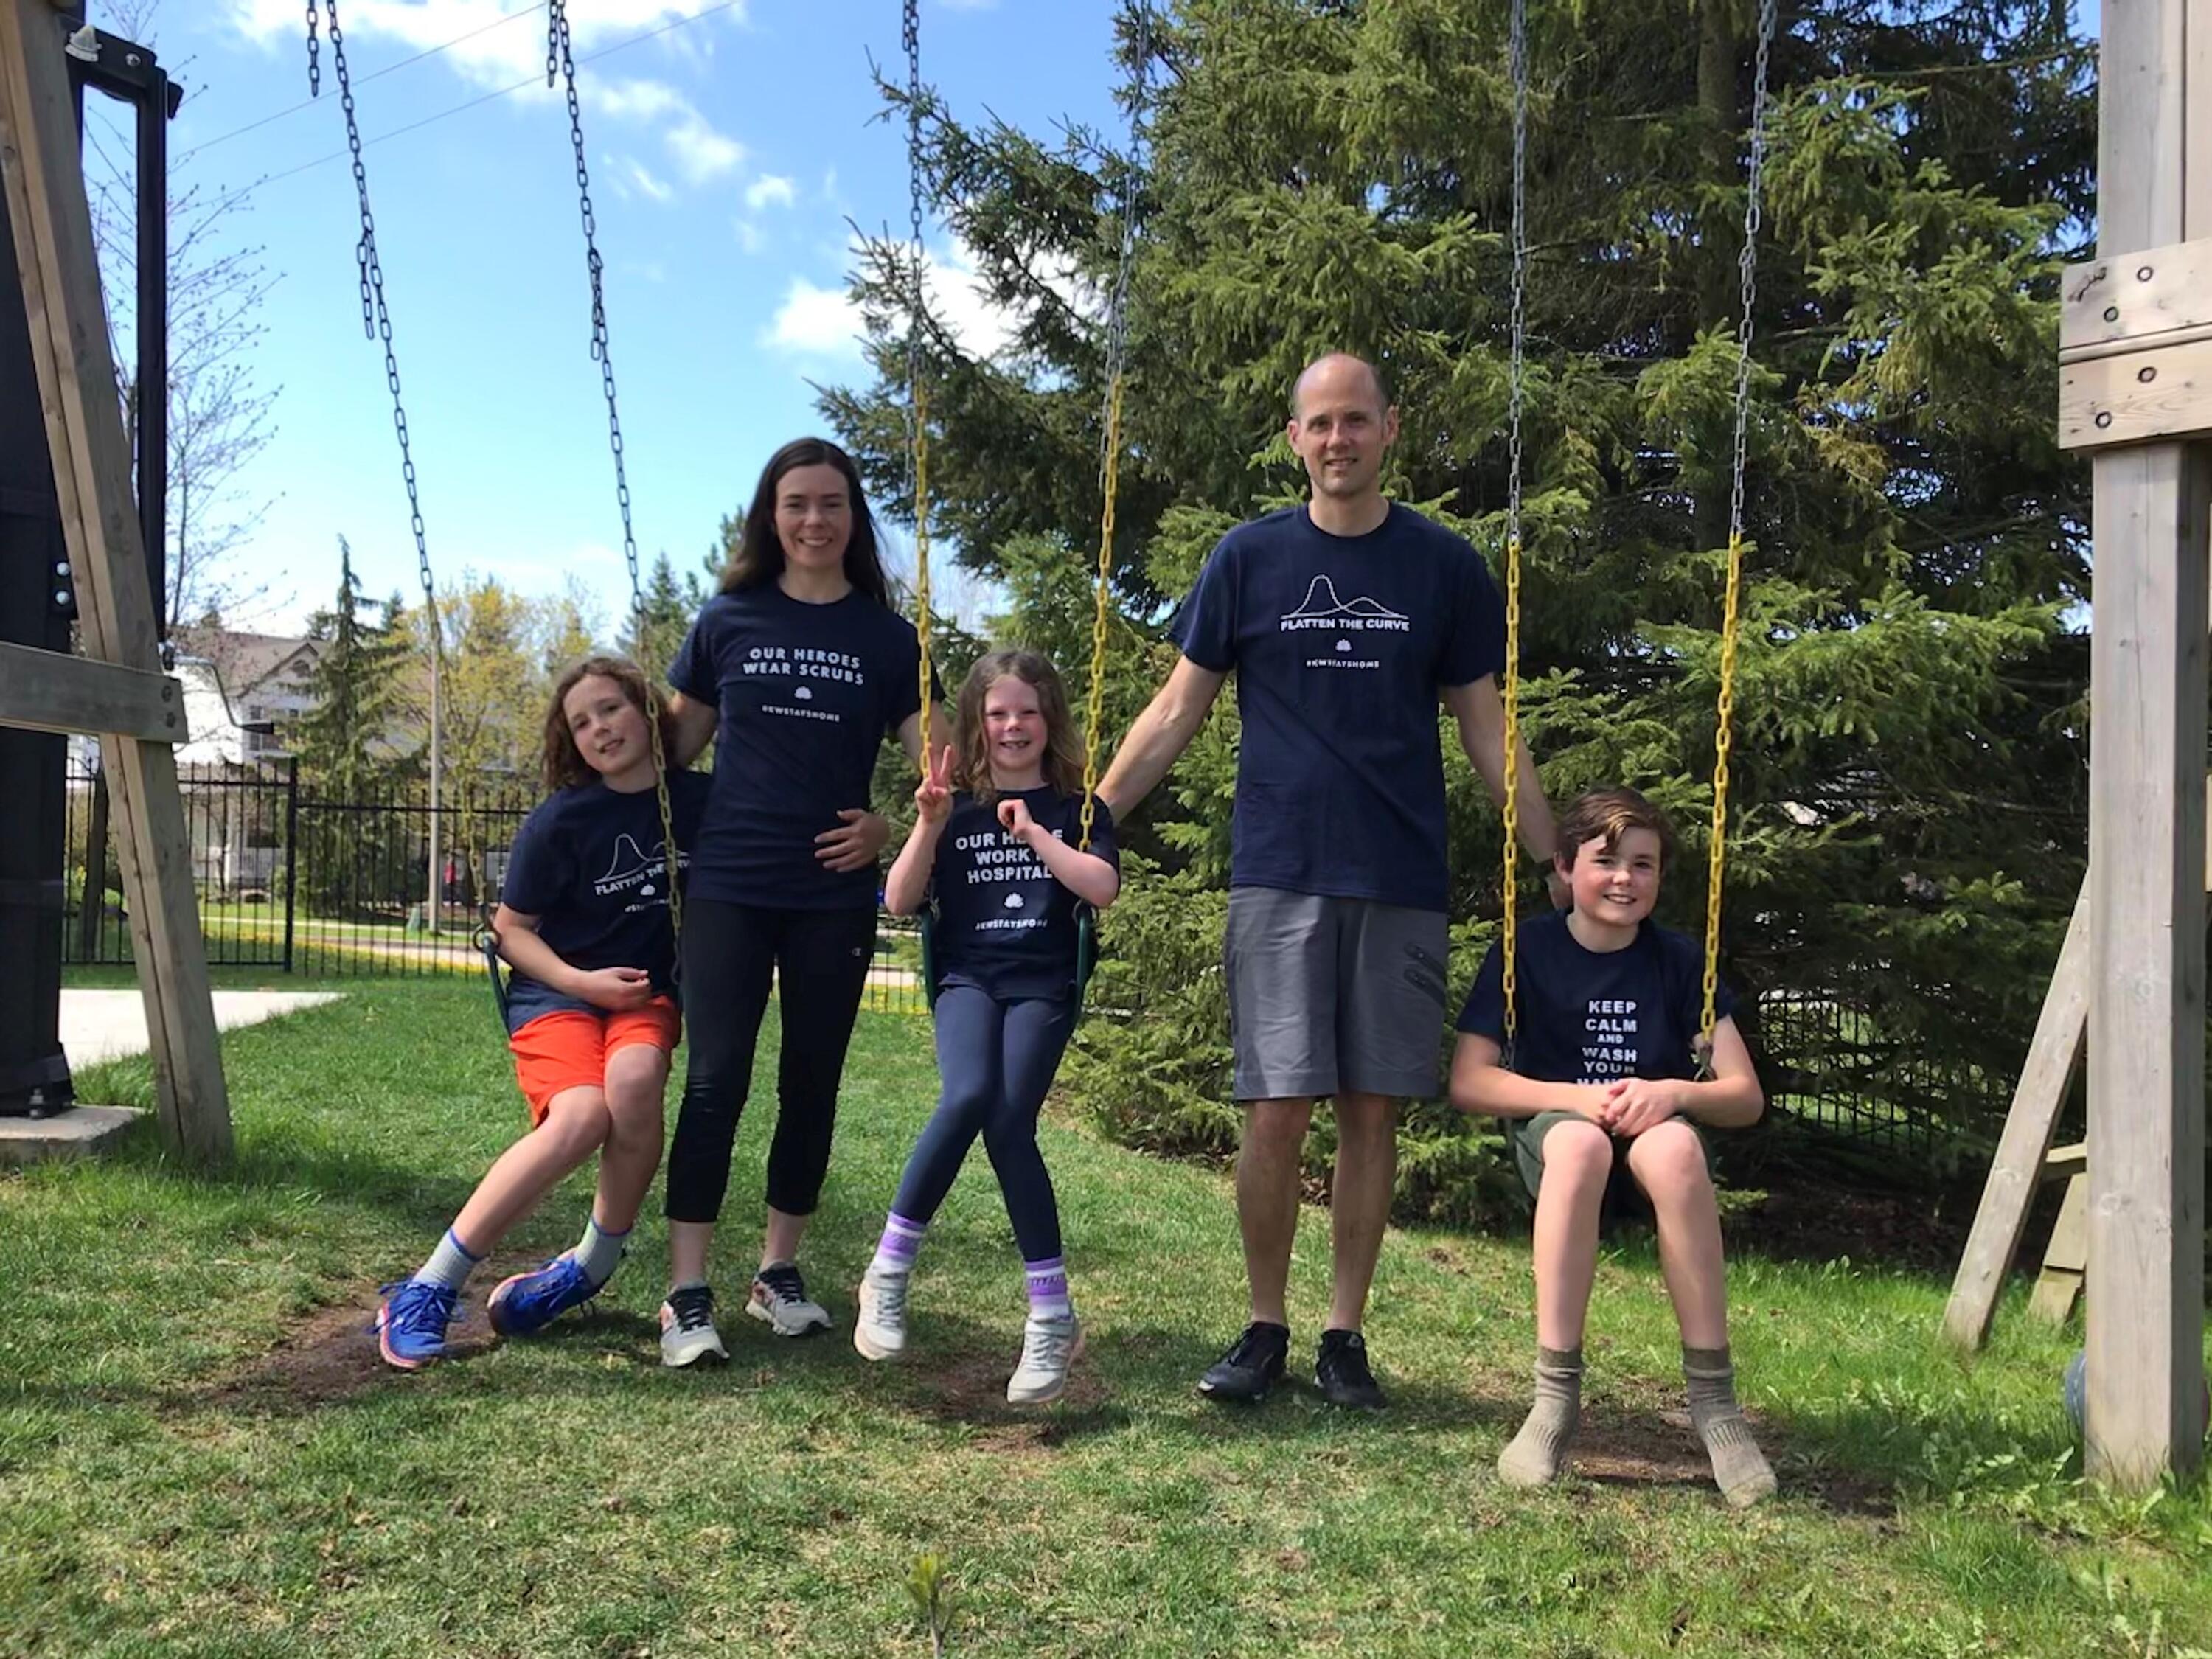 Jay Green stands at a swing set with his wife and two kids. They wear black shirts that promote flattening the COVID-19 curve.